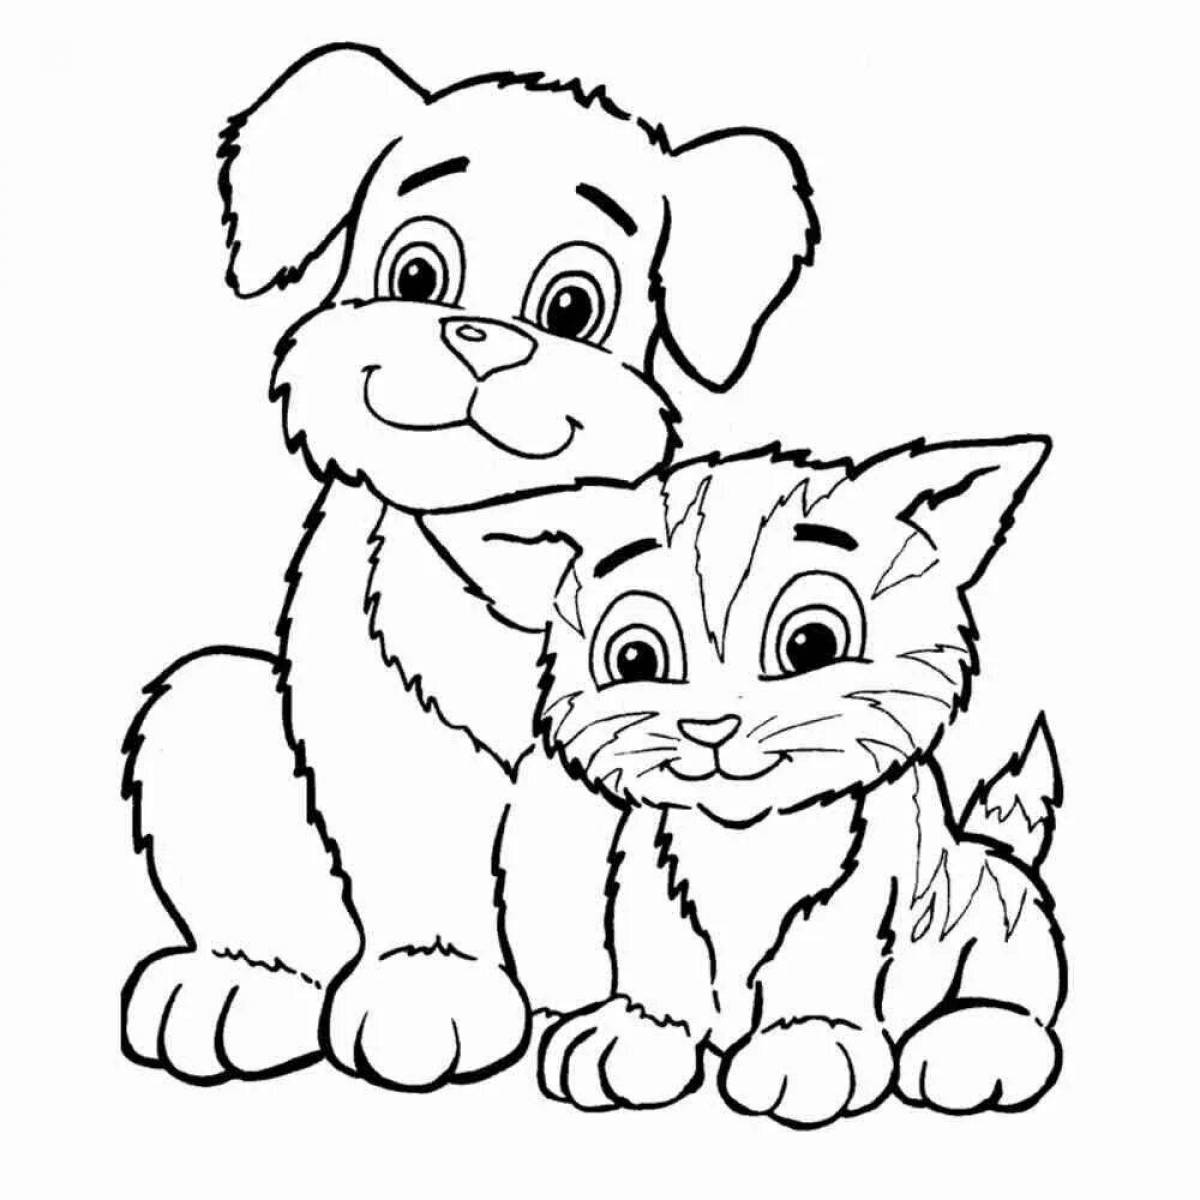 Coloring page loving dog and cat